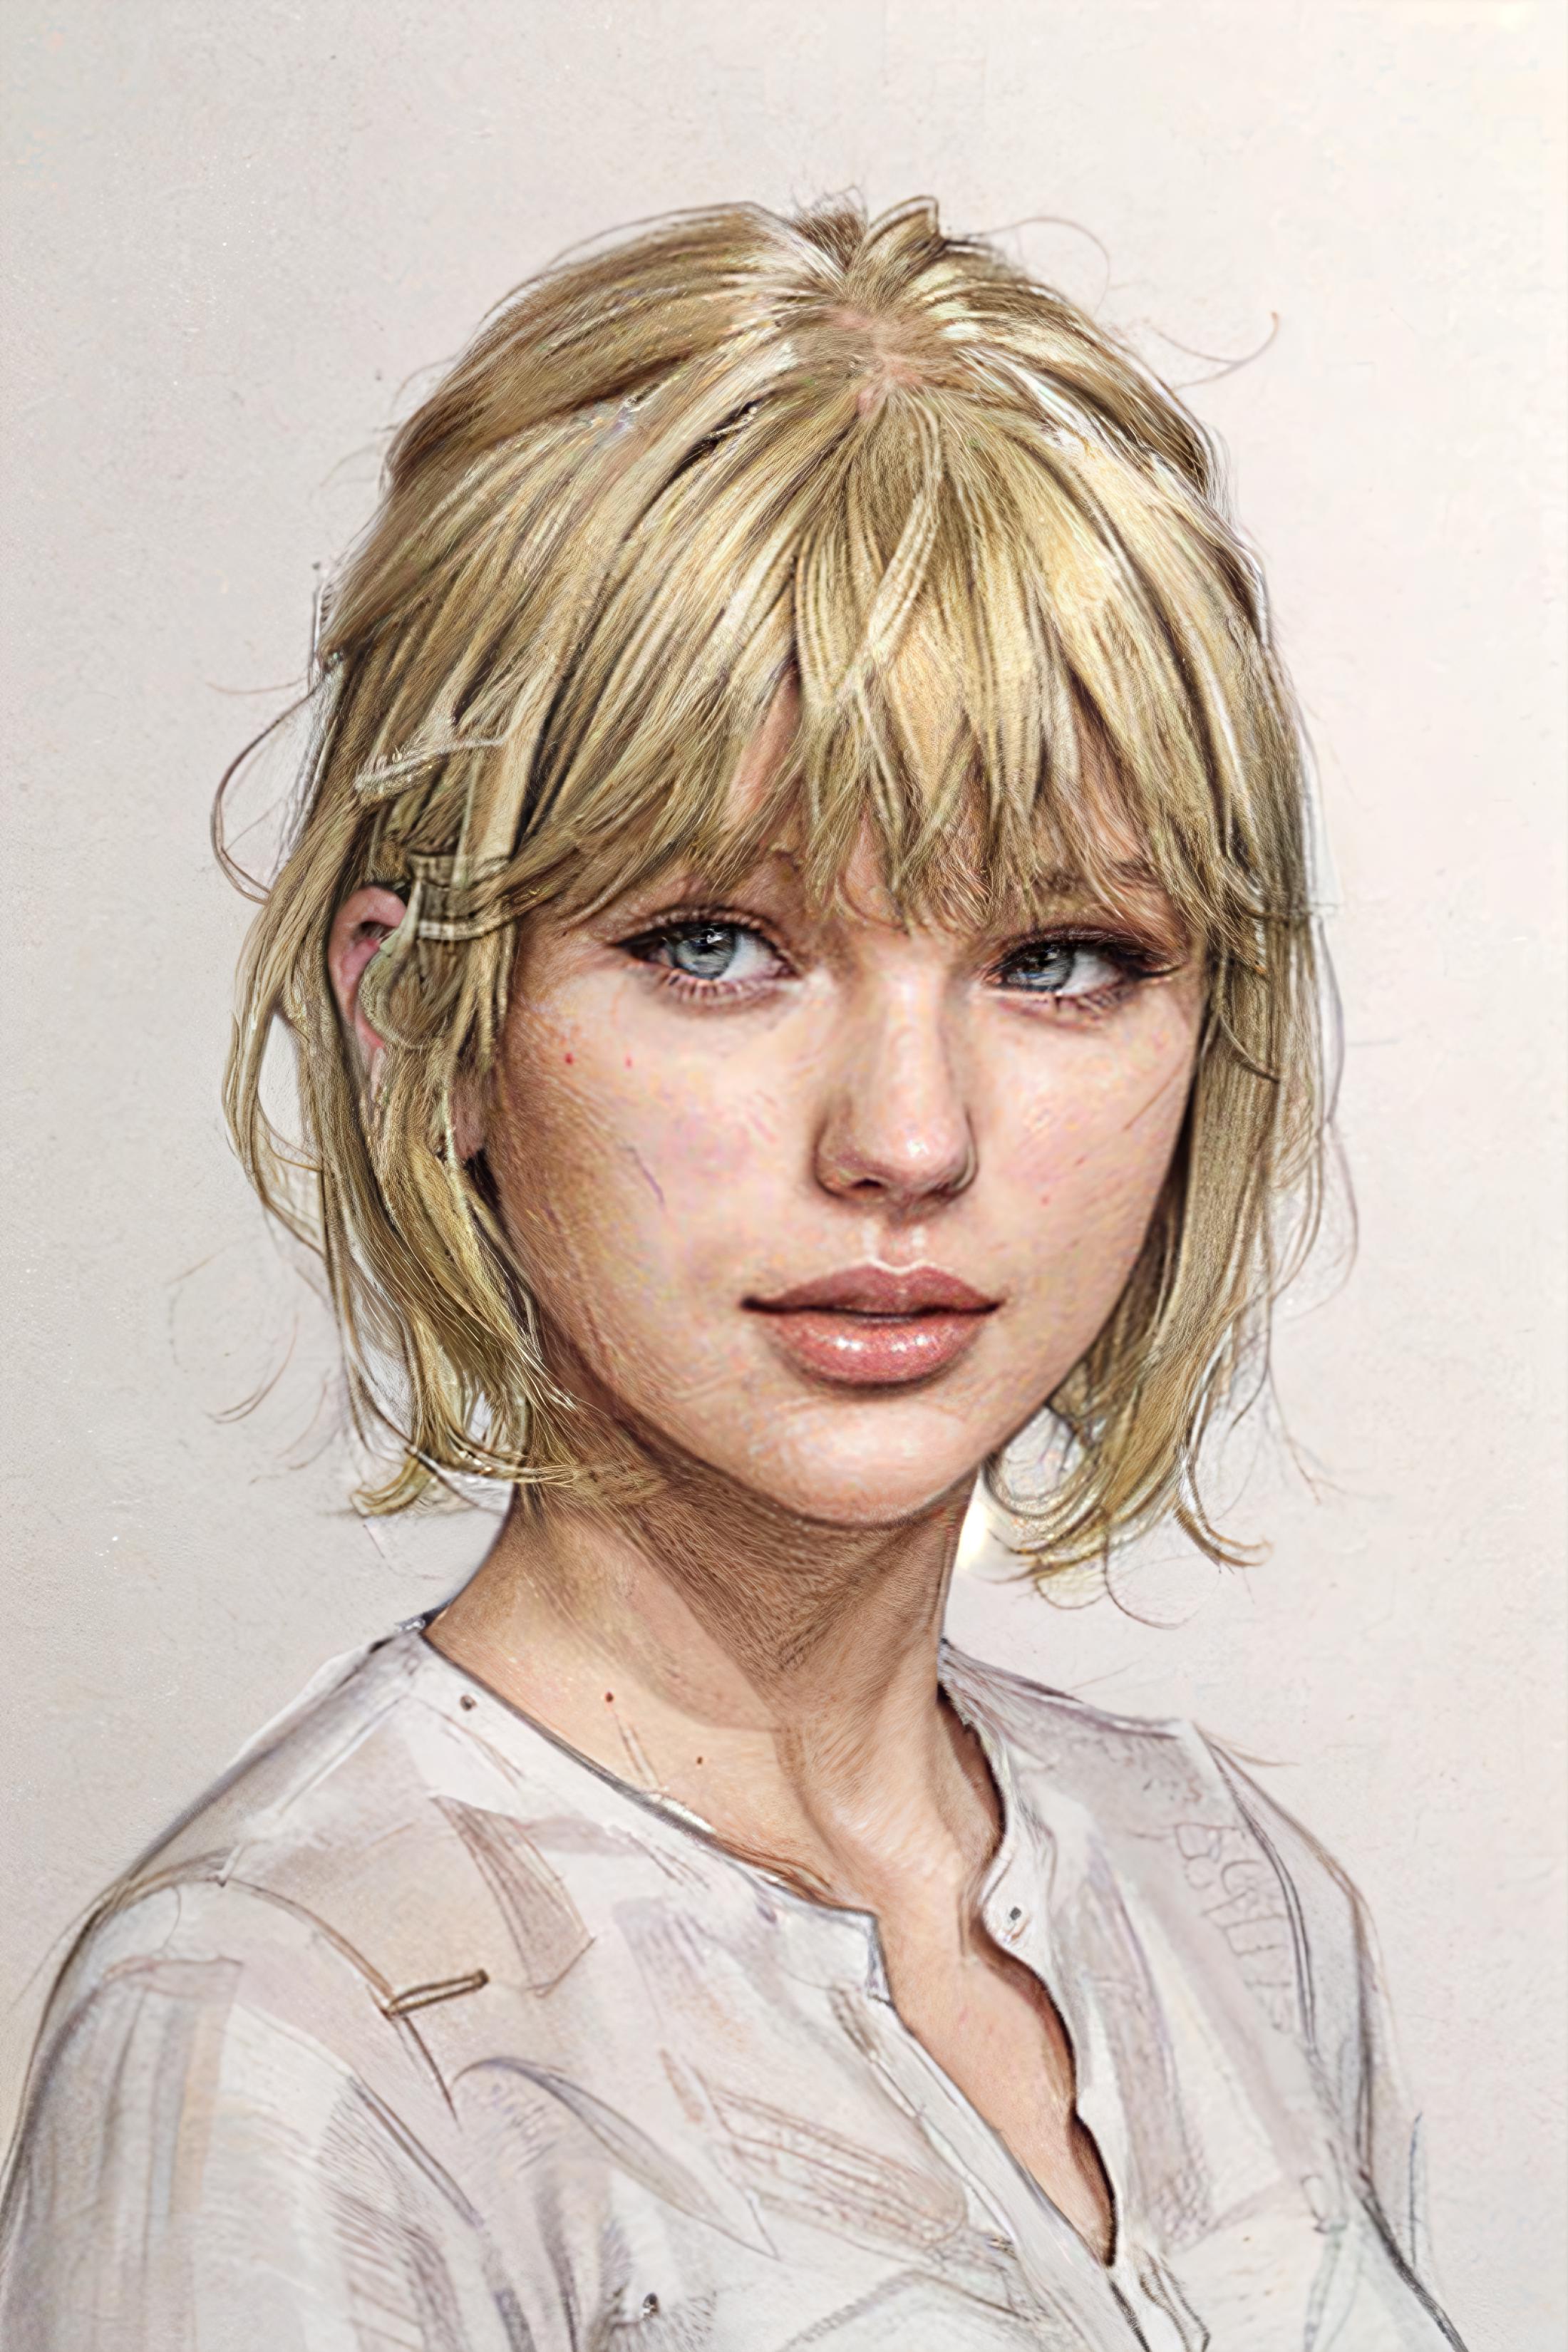 Taylor Swift image by __2_